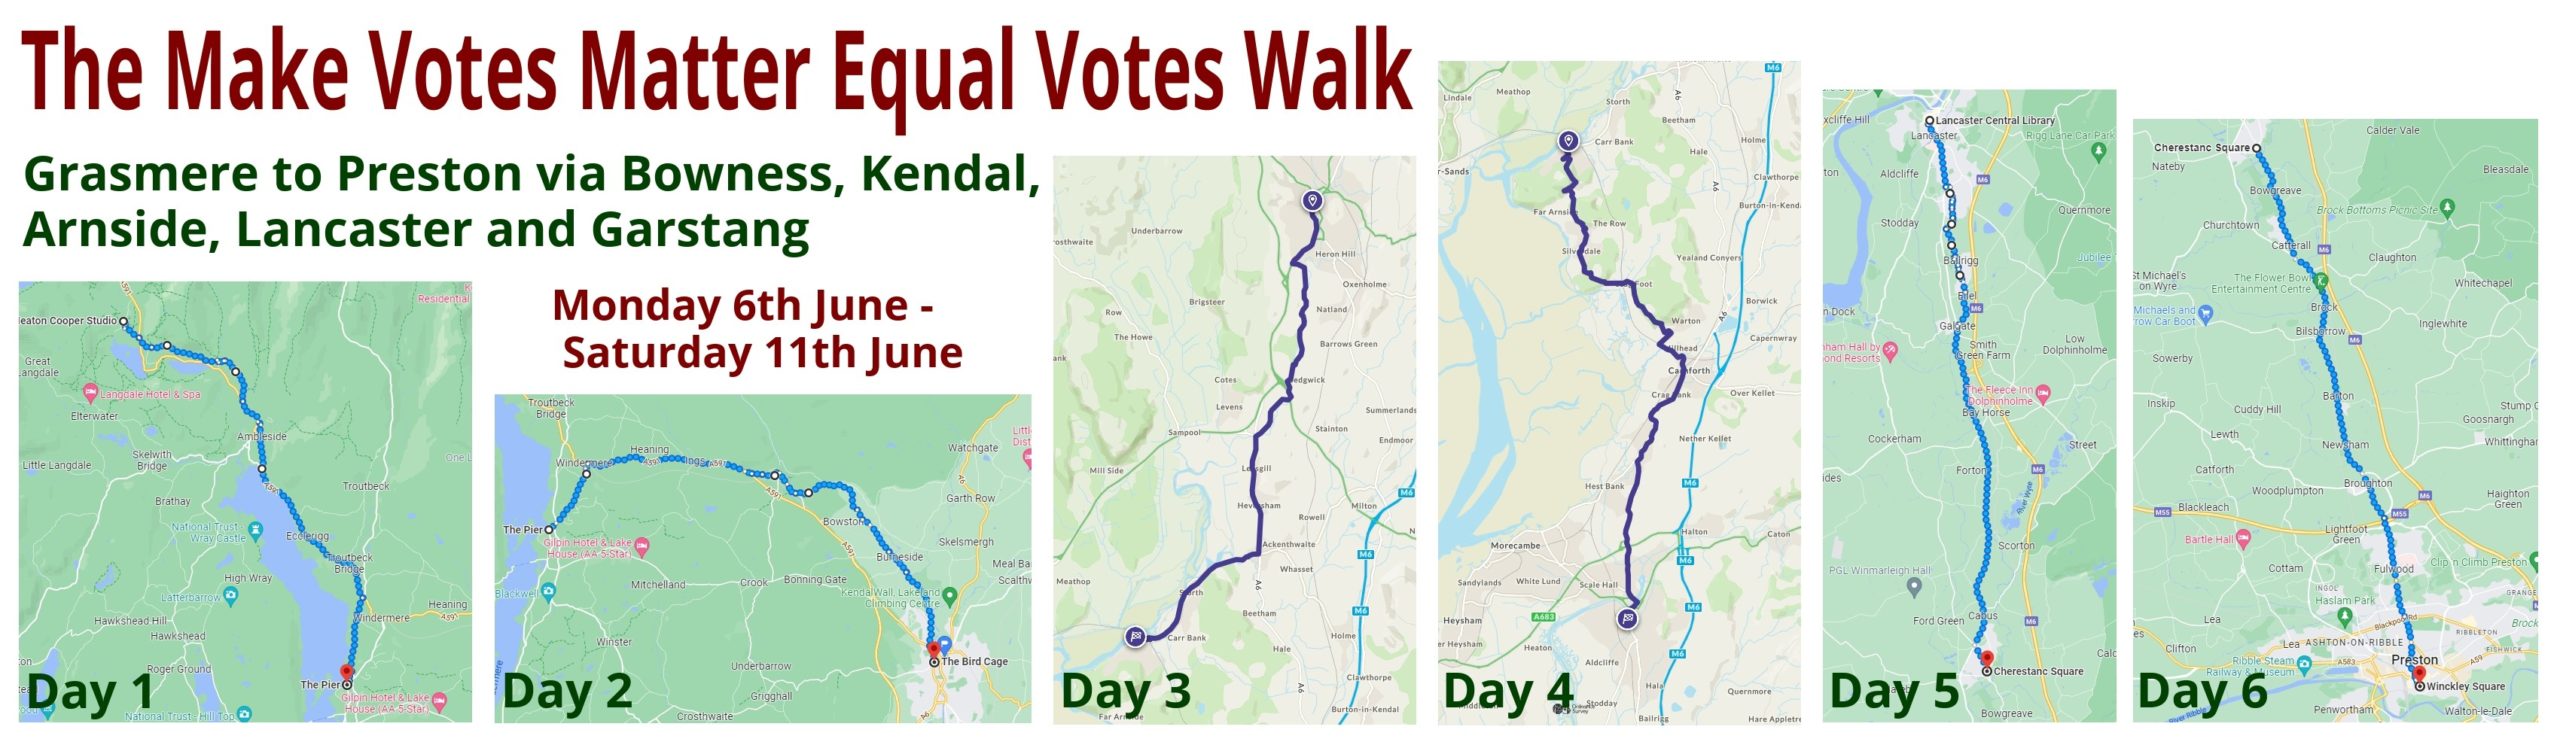 Daily route maps for the Equal Votes Walk from Grasmere to Preston 6-11 June 2022